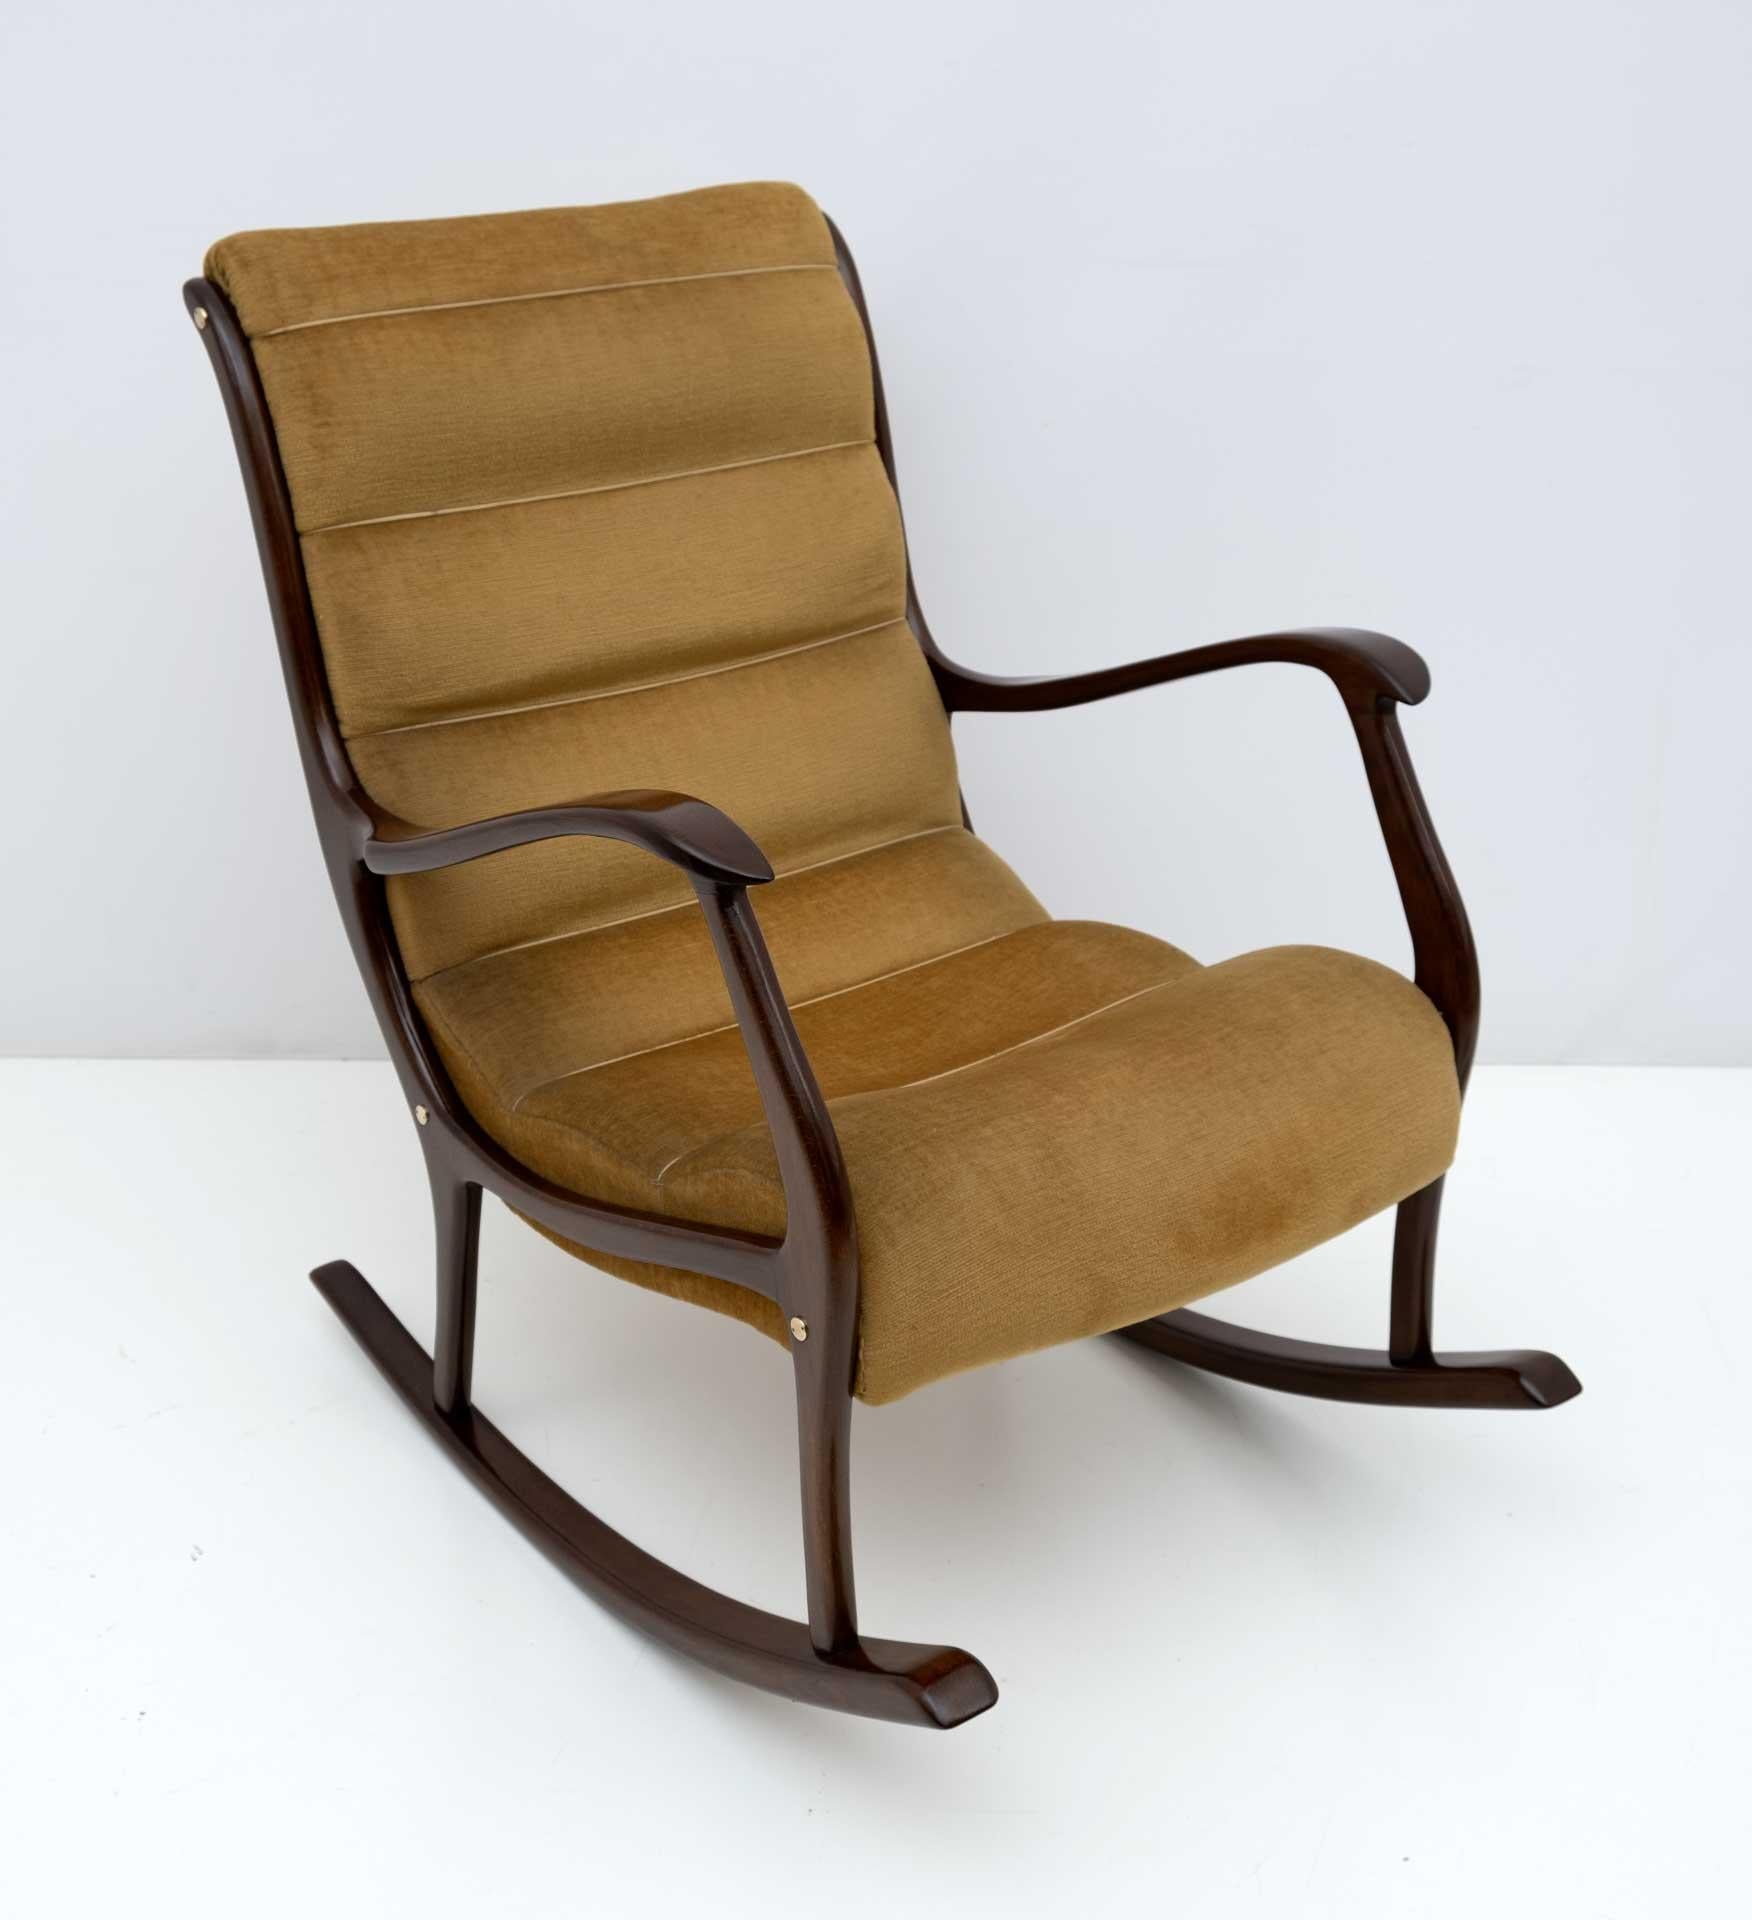 Rare and original rocking chair mod. Mitzi design by Ezio Longhi for Elam from the 1950s. We have only restored the wooden part, it needs a new upholstery.
This is a collectible chair.